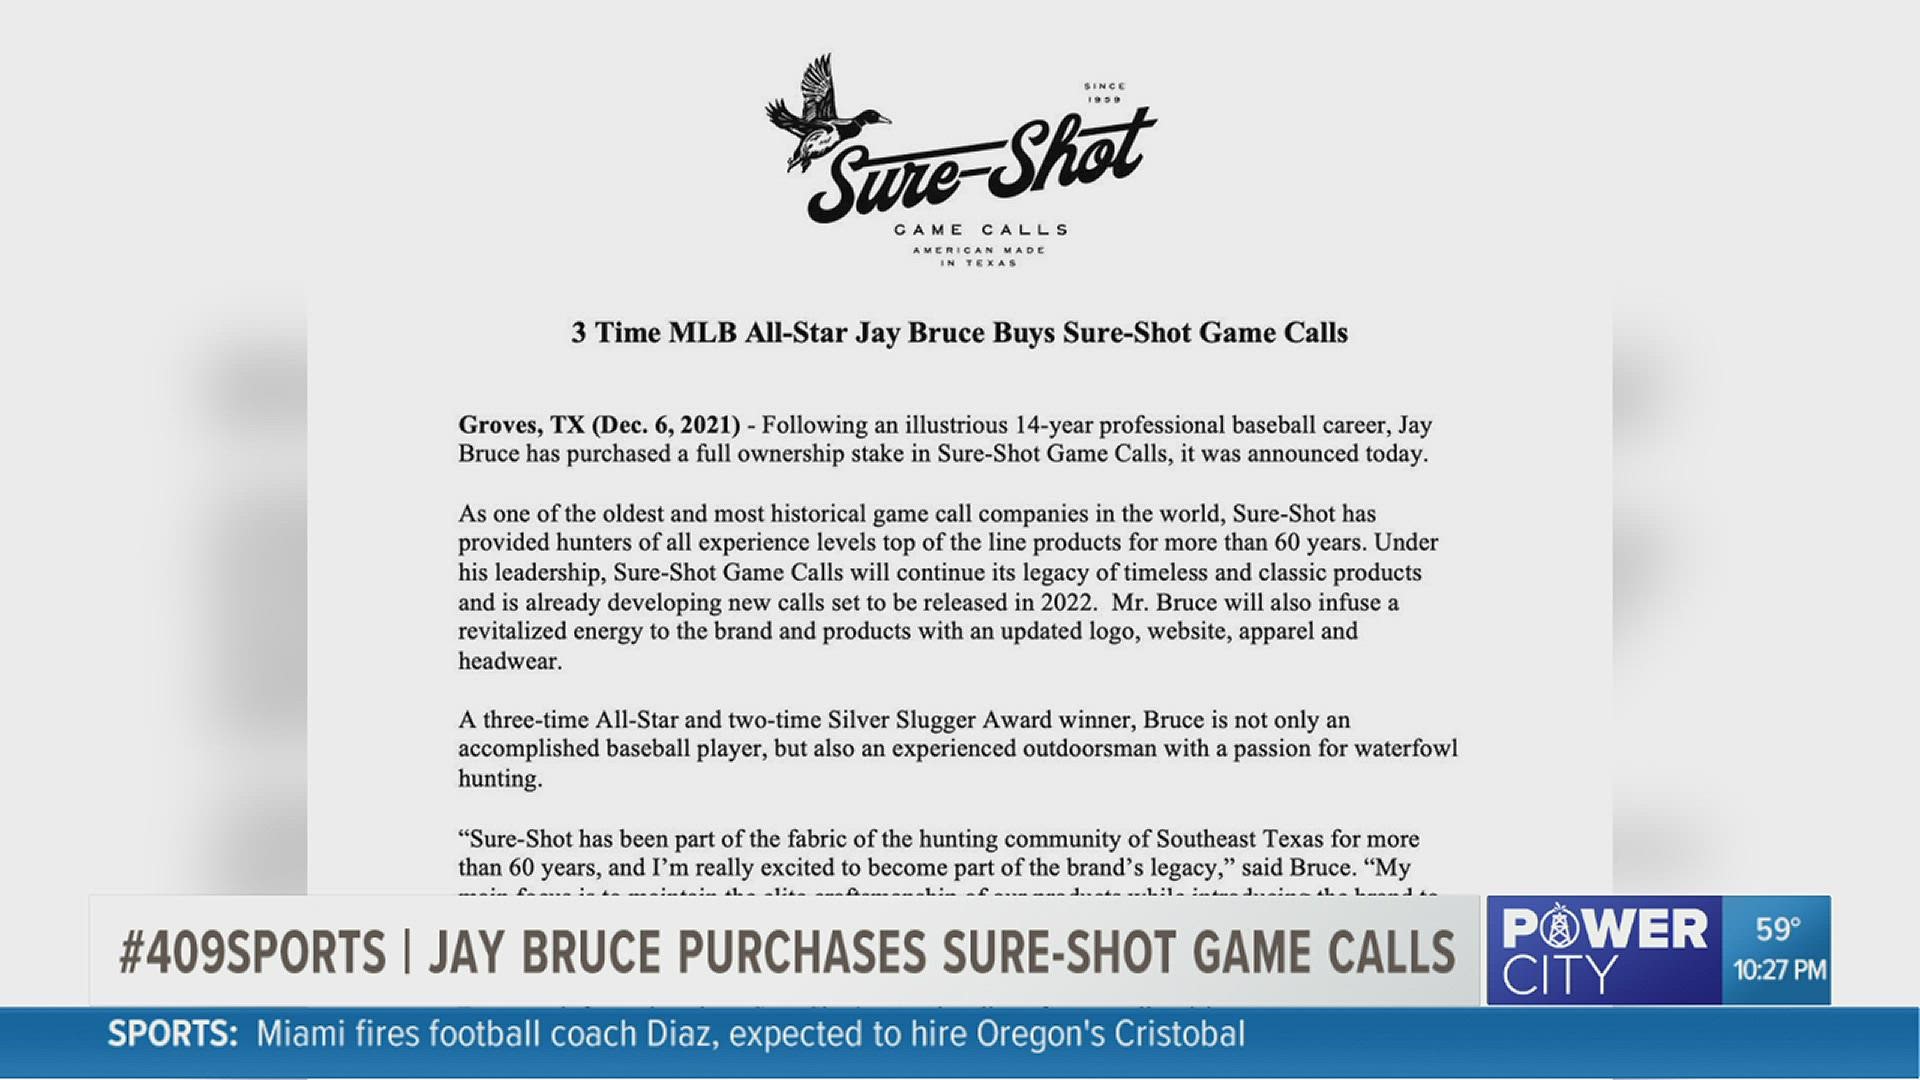 After spending fourteen years playing professional baseball, West Brook alum Jay Bruce purchases Sure-Shot Game Calls